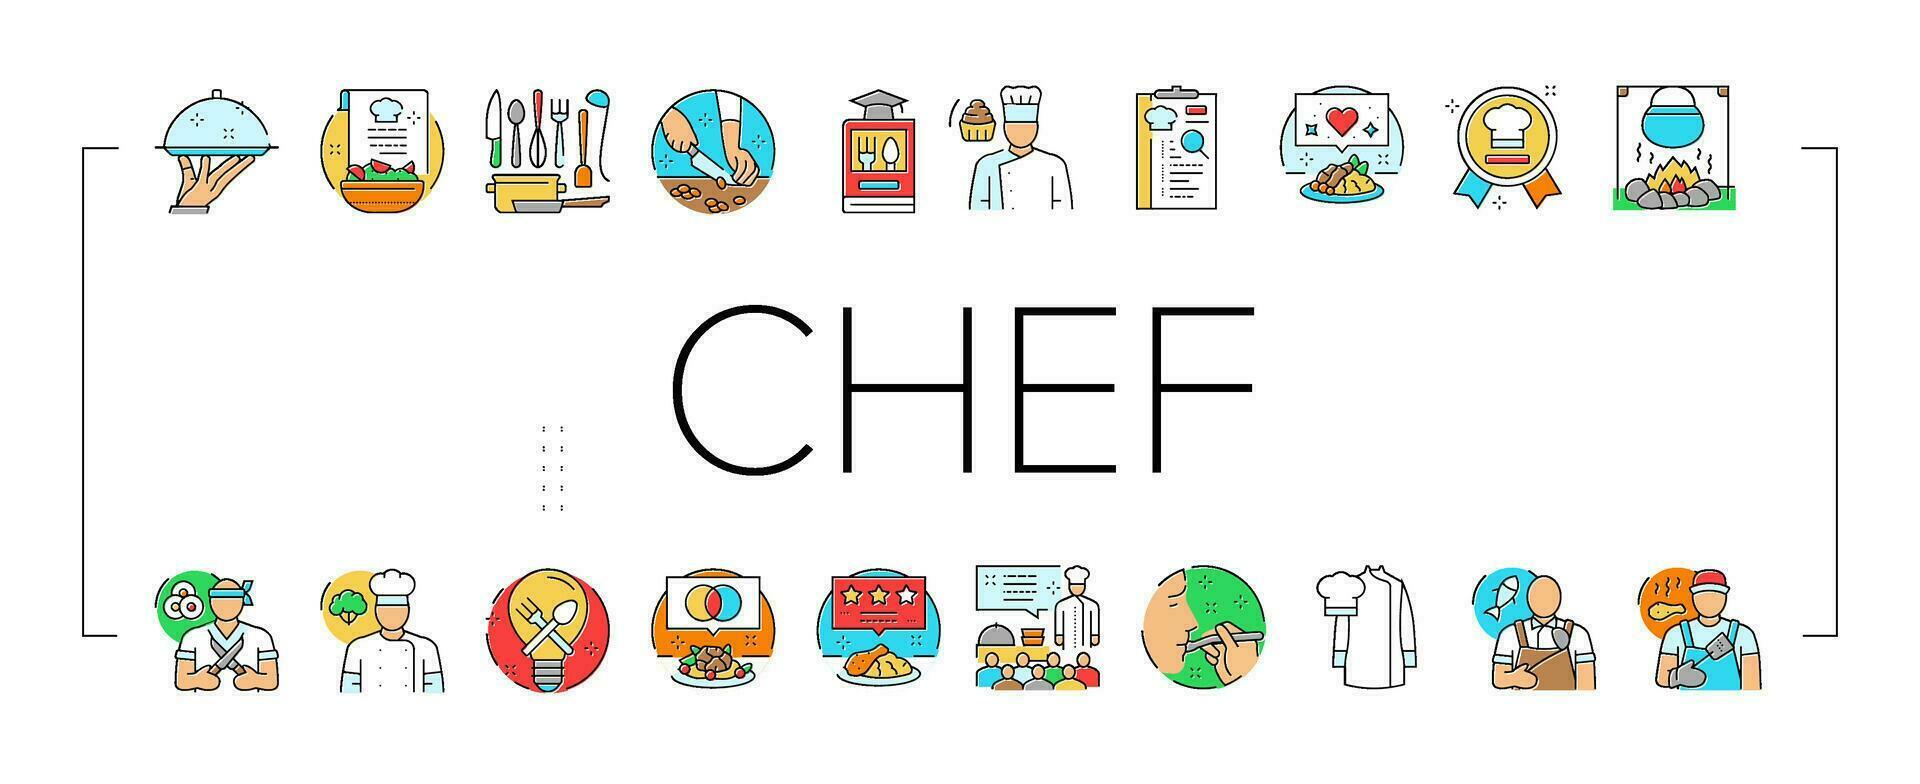 restaurant chef cooking food icons set vector